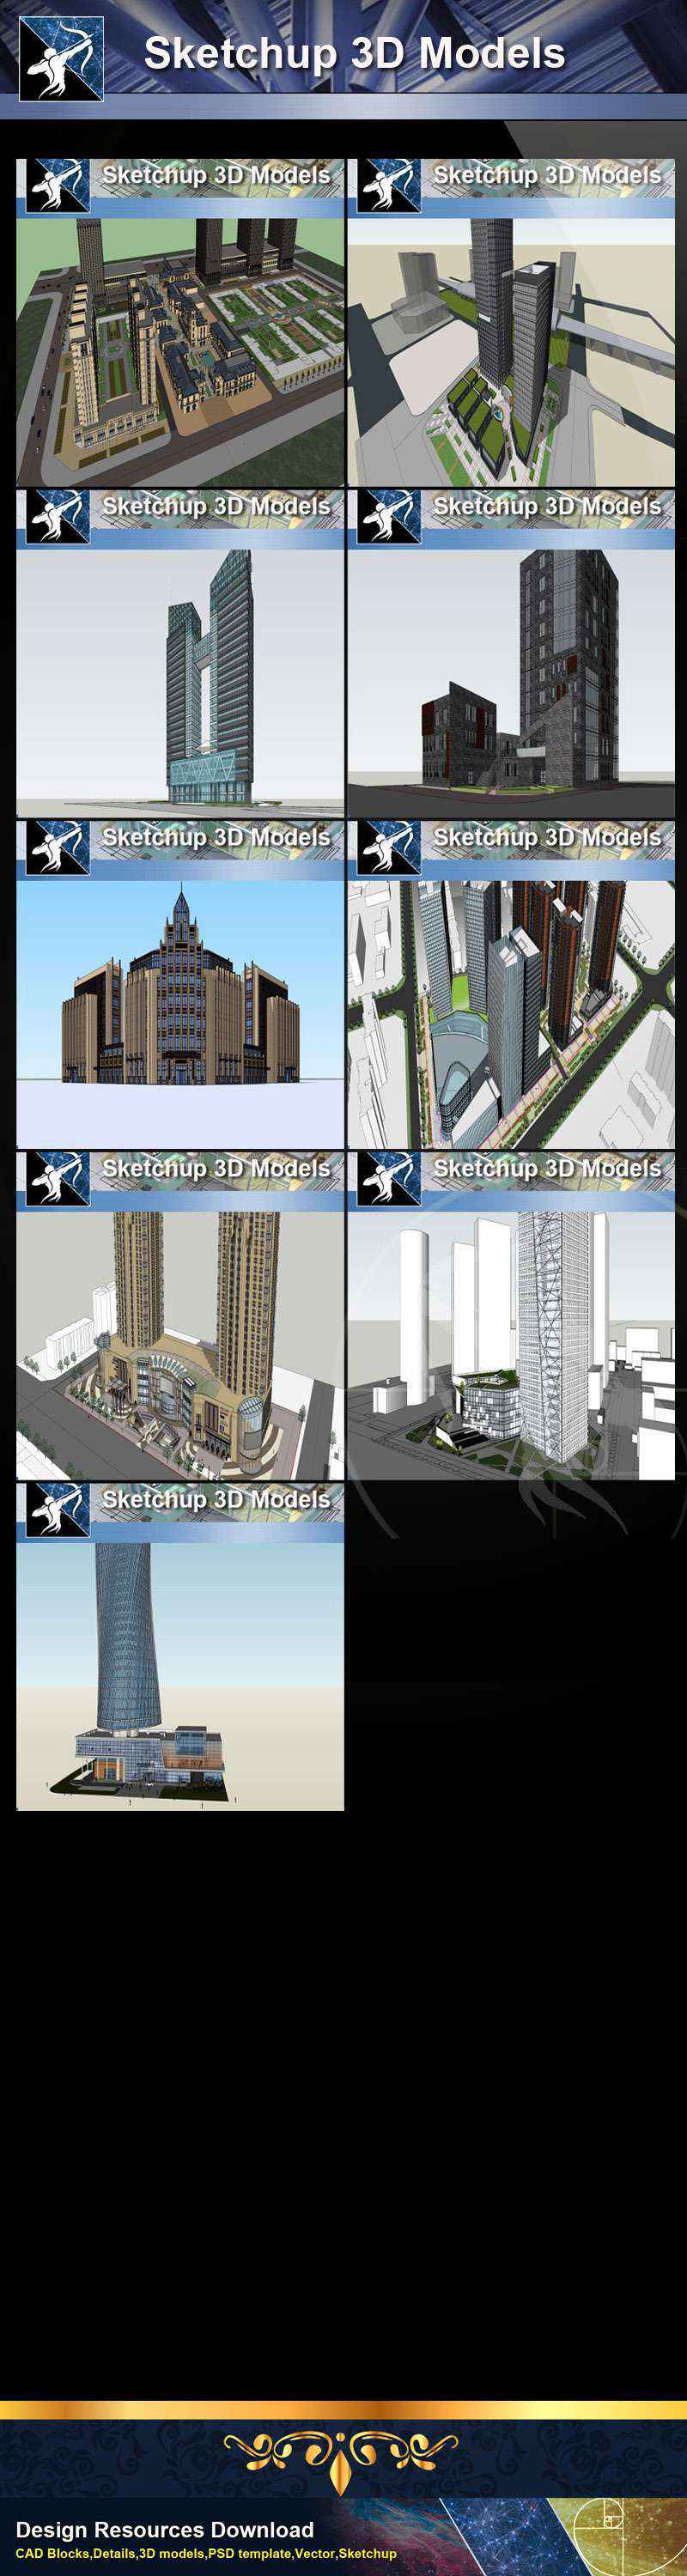 ★Best 37 Types of Commercial,Shopping Mall Sketchup 3D Models Collection